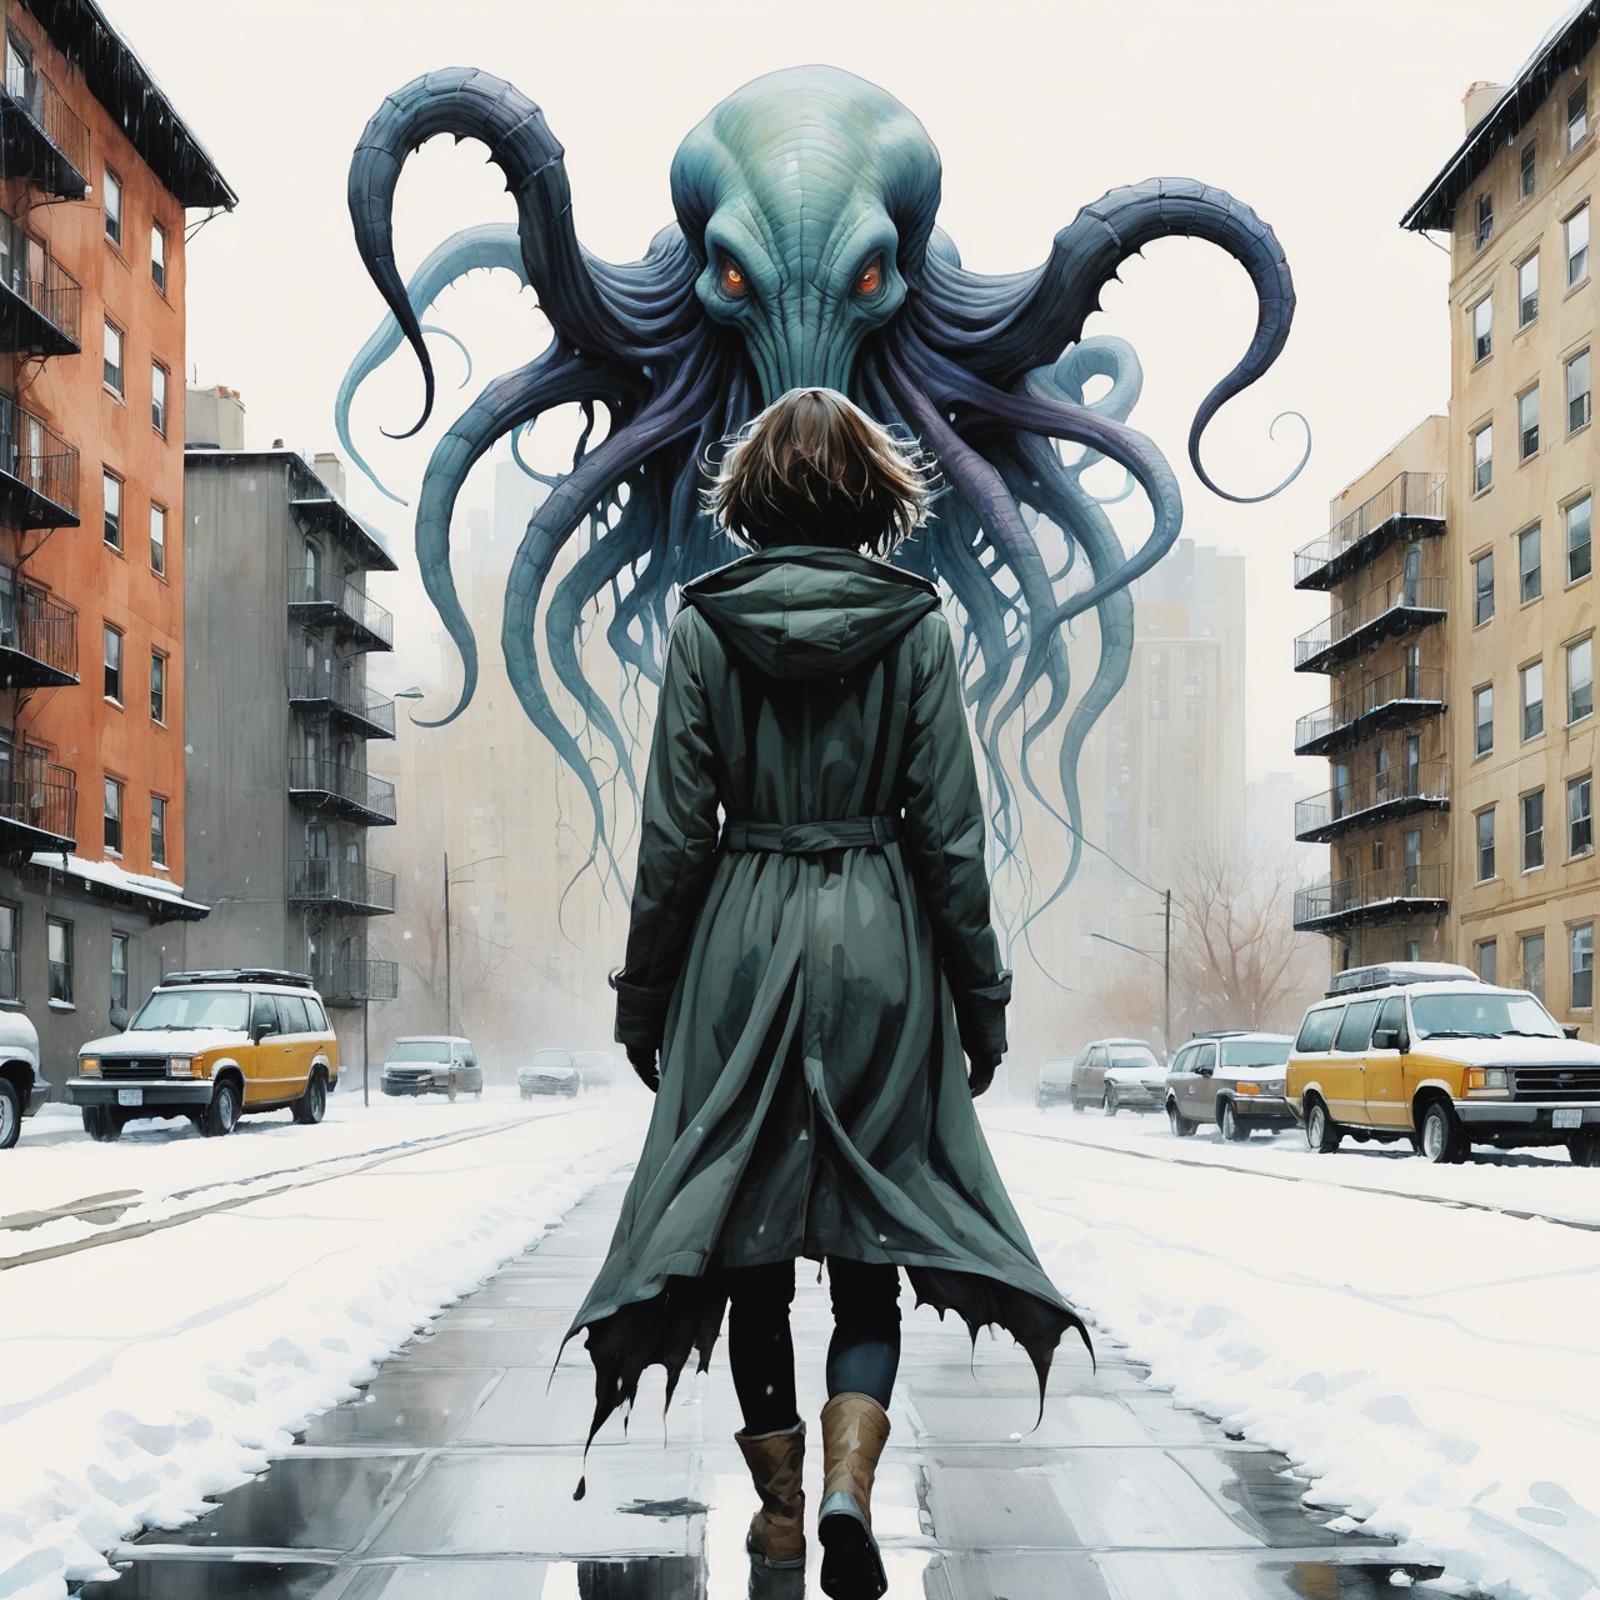 Woman walking down a city street with a giant squid in the background.